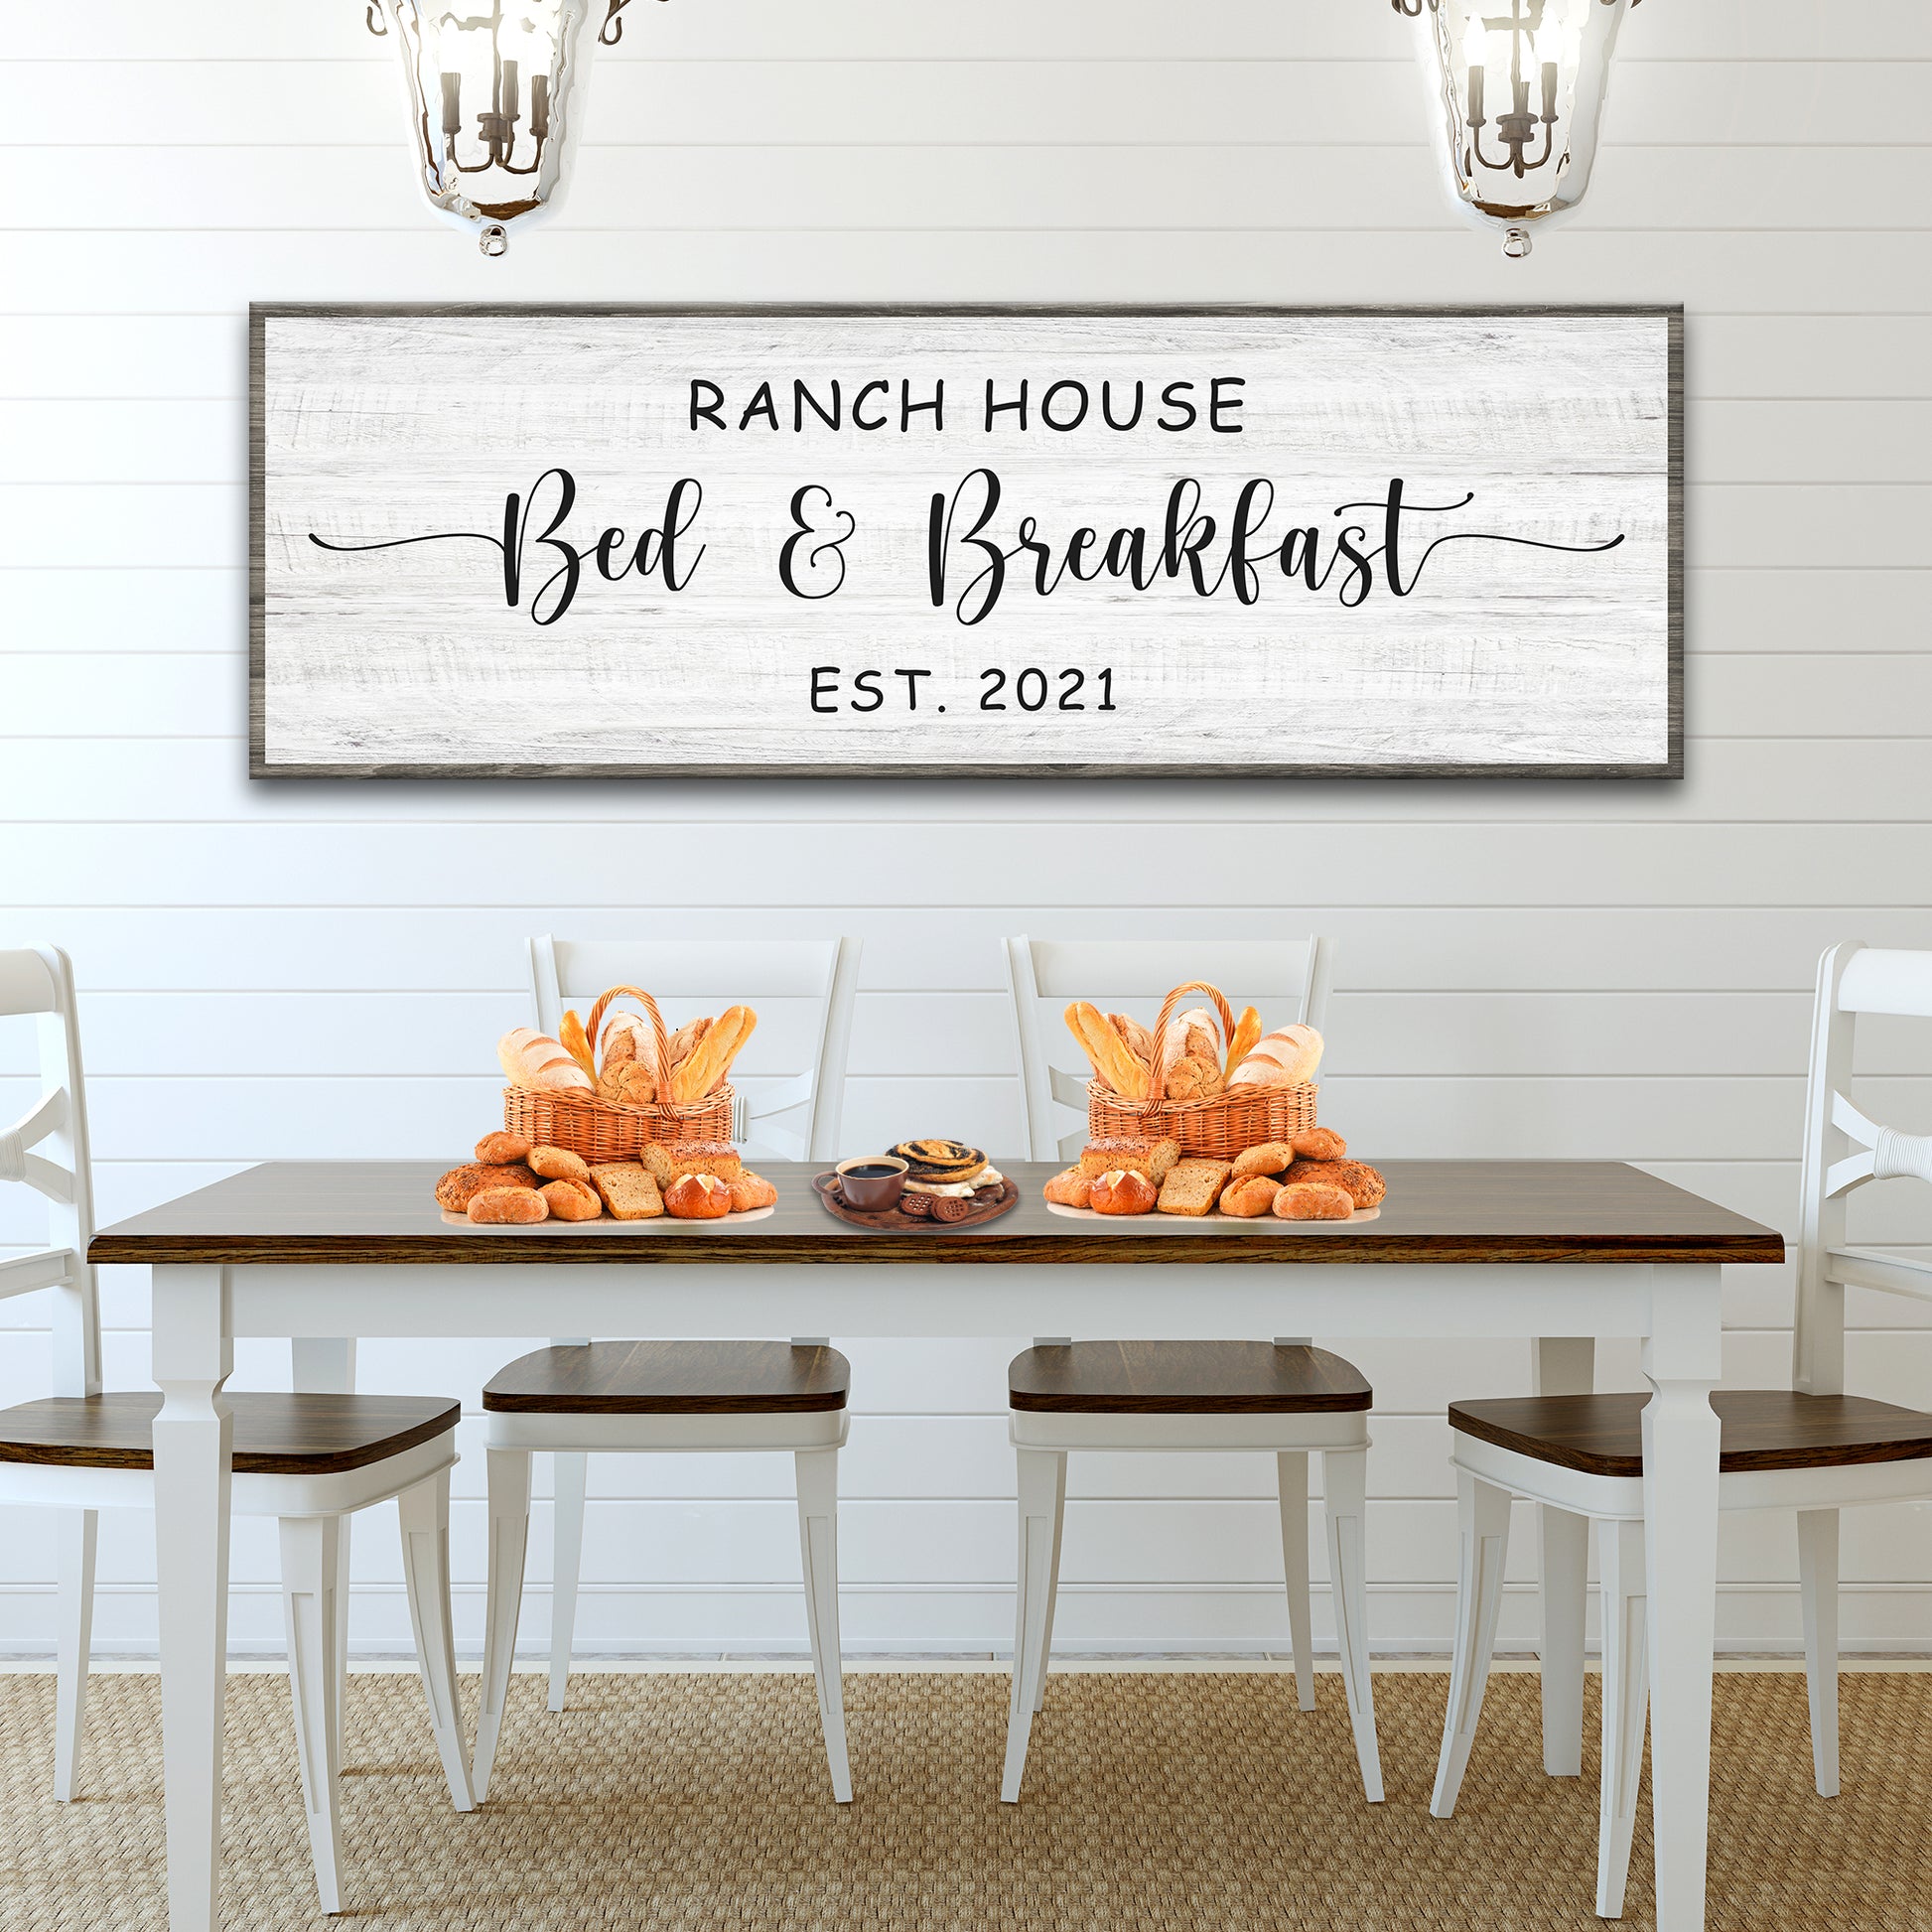 Ranch House Bed & Breakfast Sign | Customizable Canvas - Image by Tailored Canvases